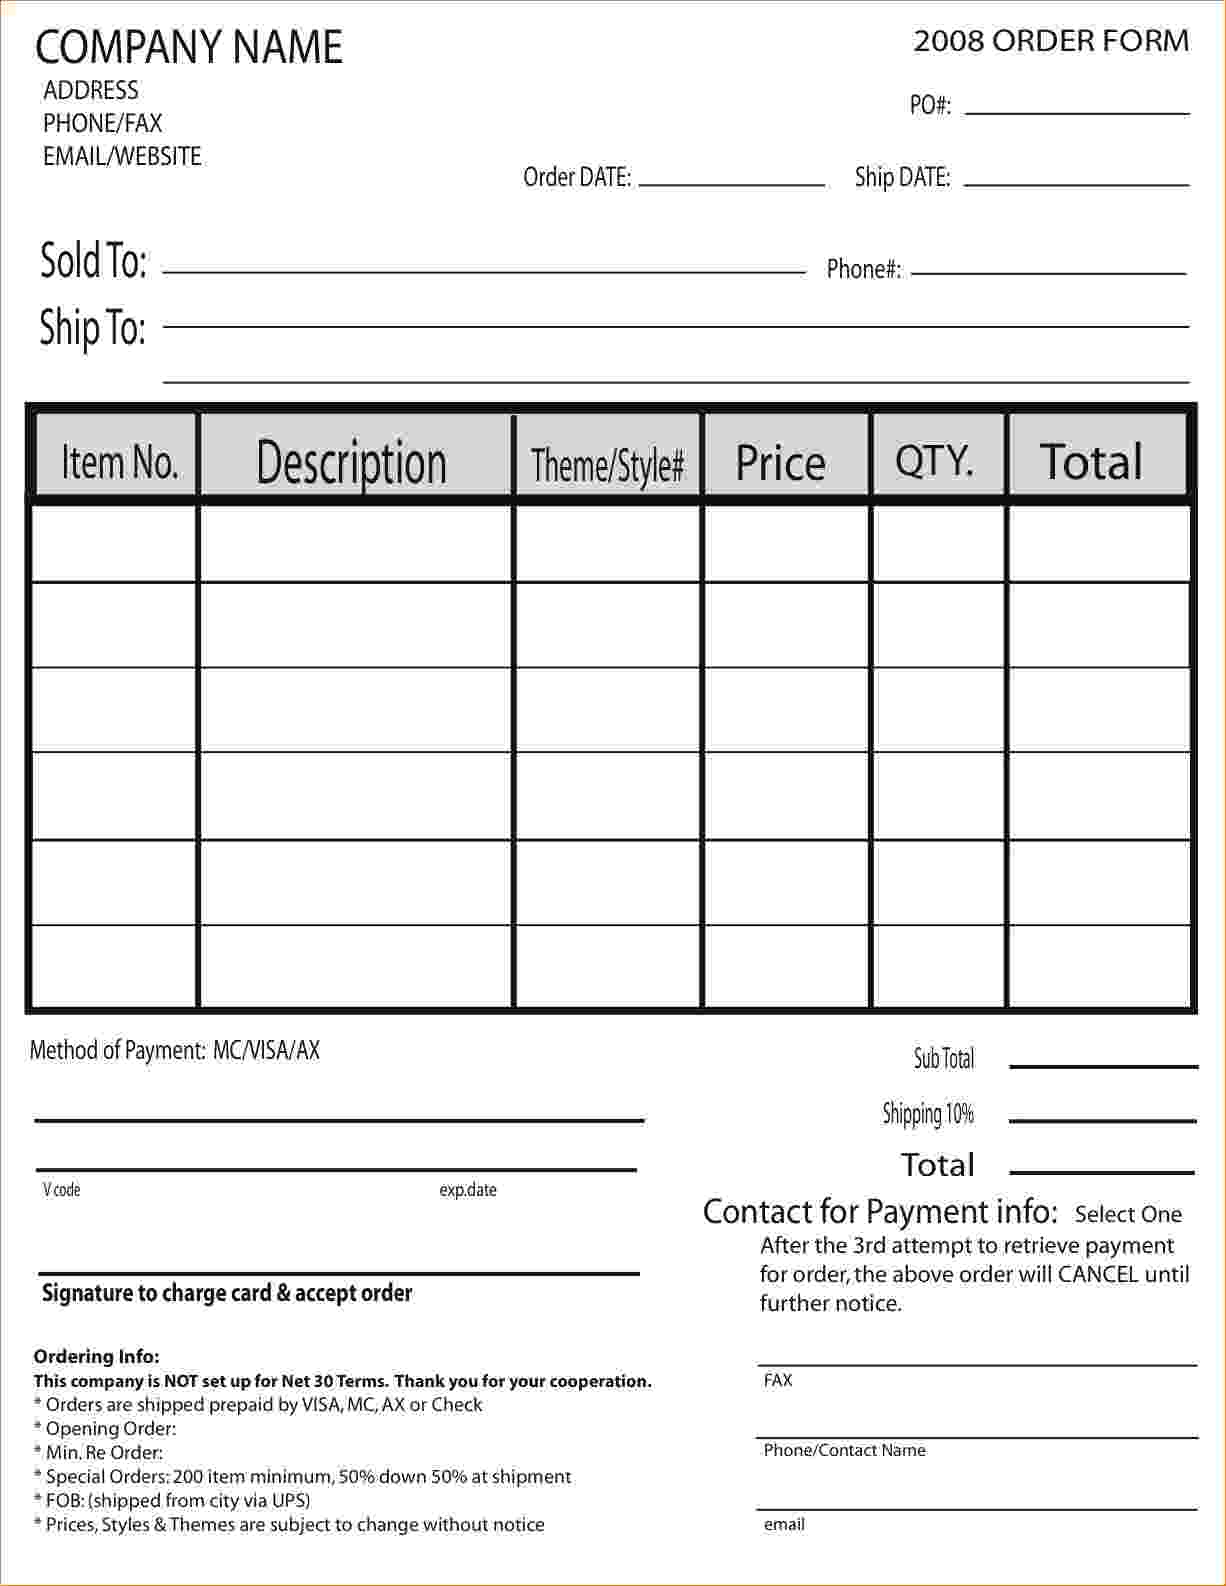 sample of order forms   Tier.brianhenry.co